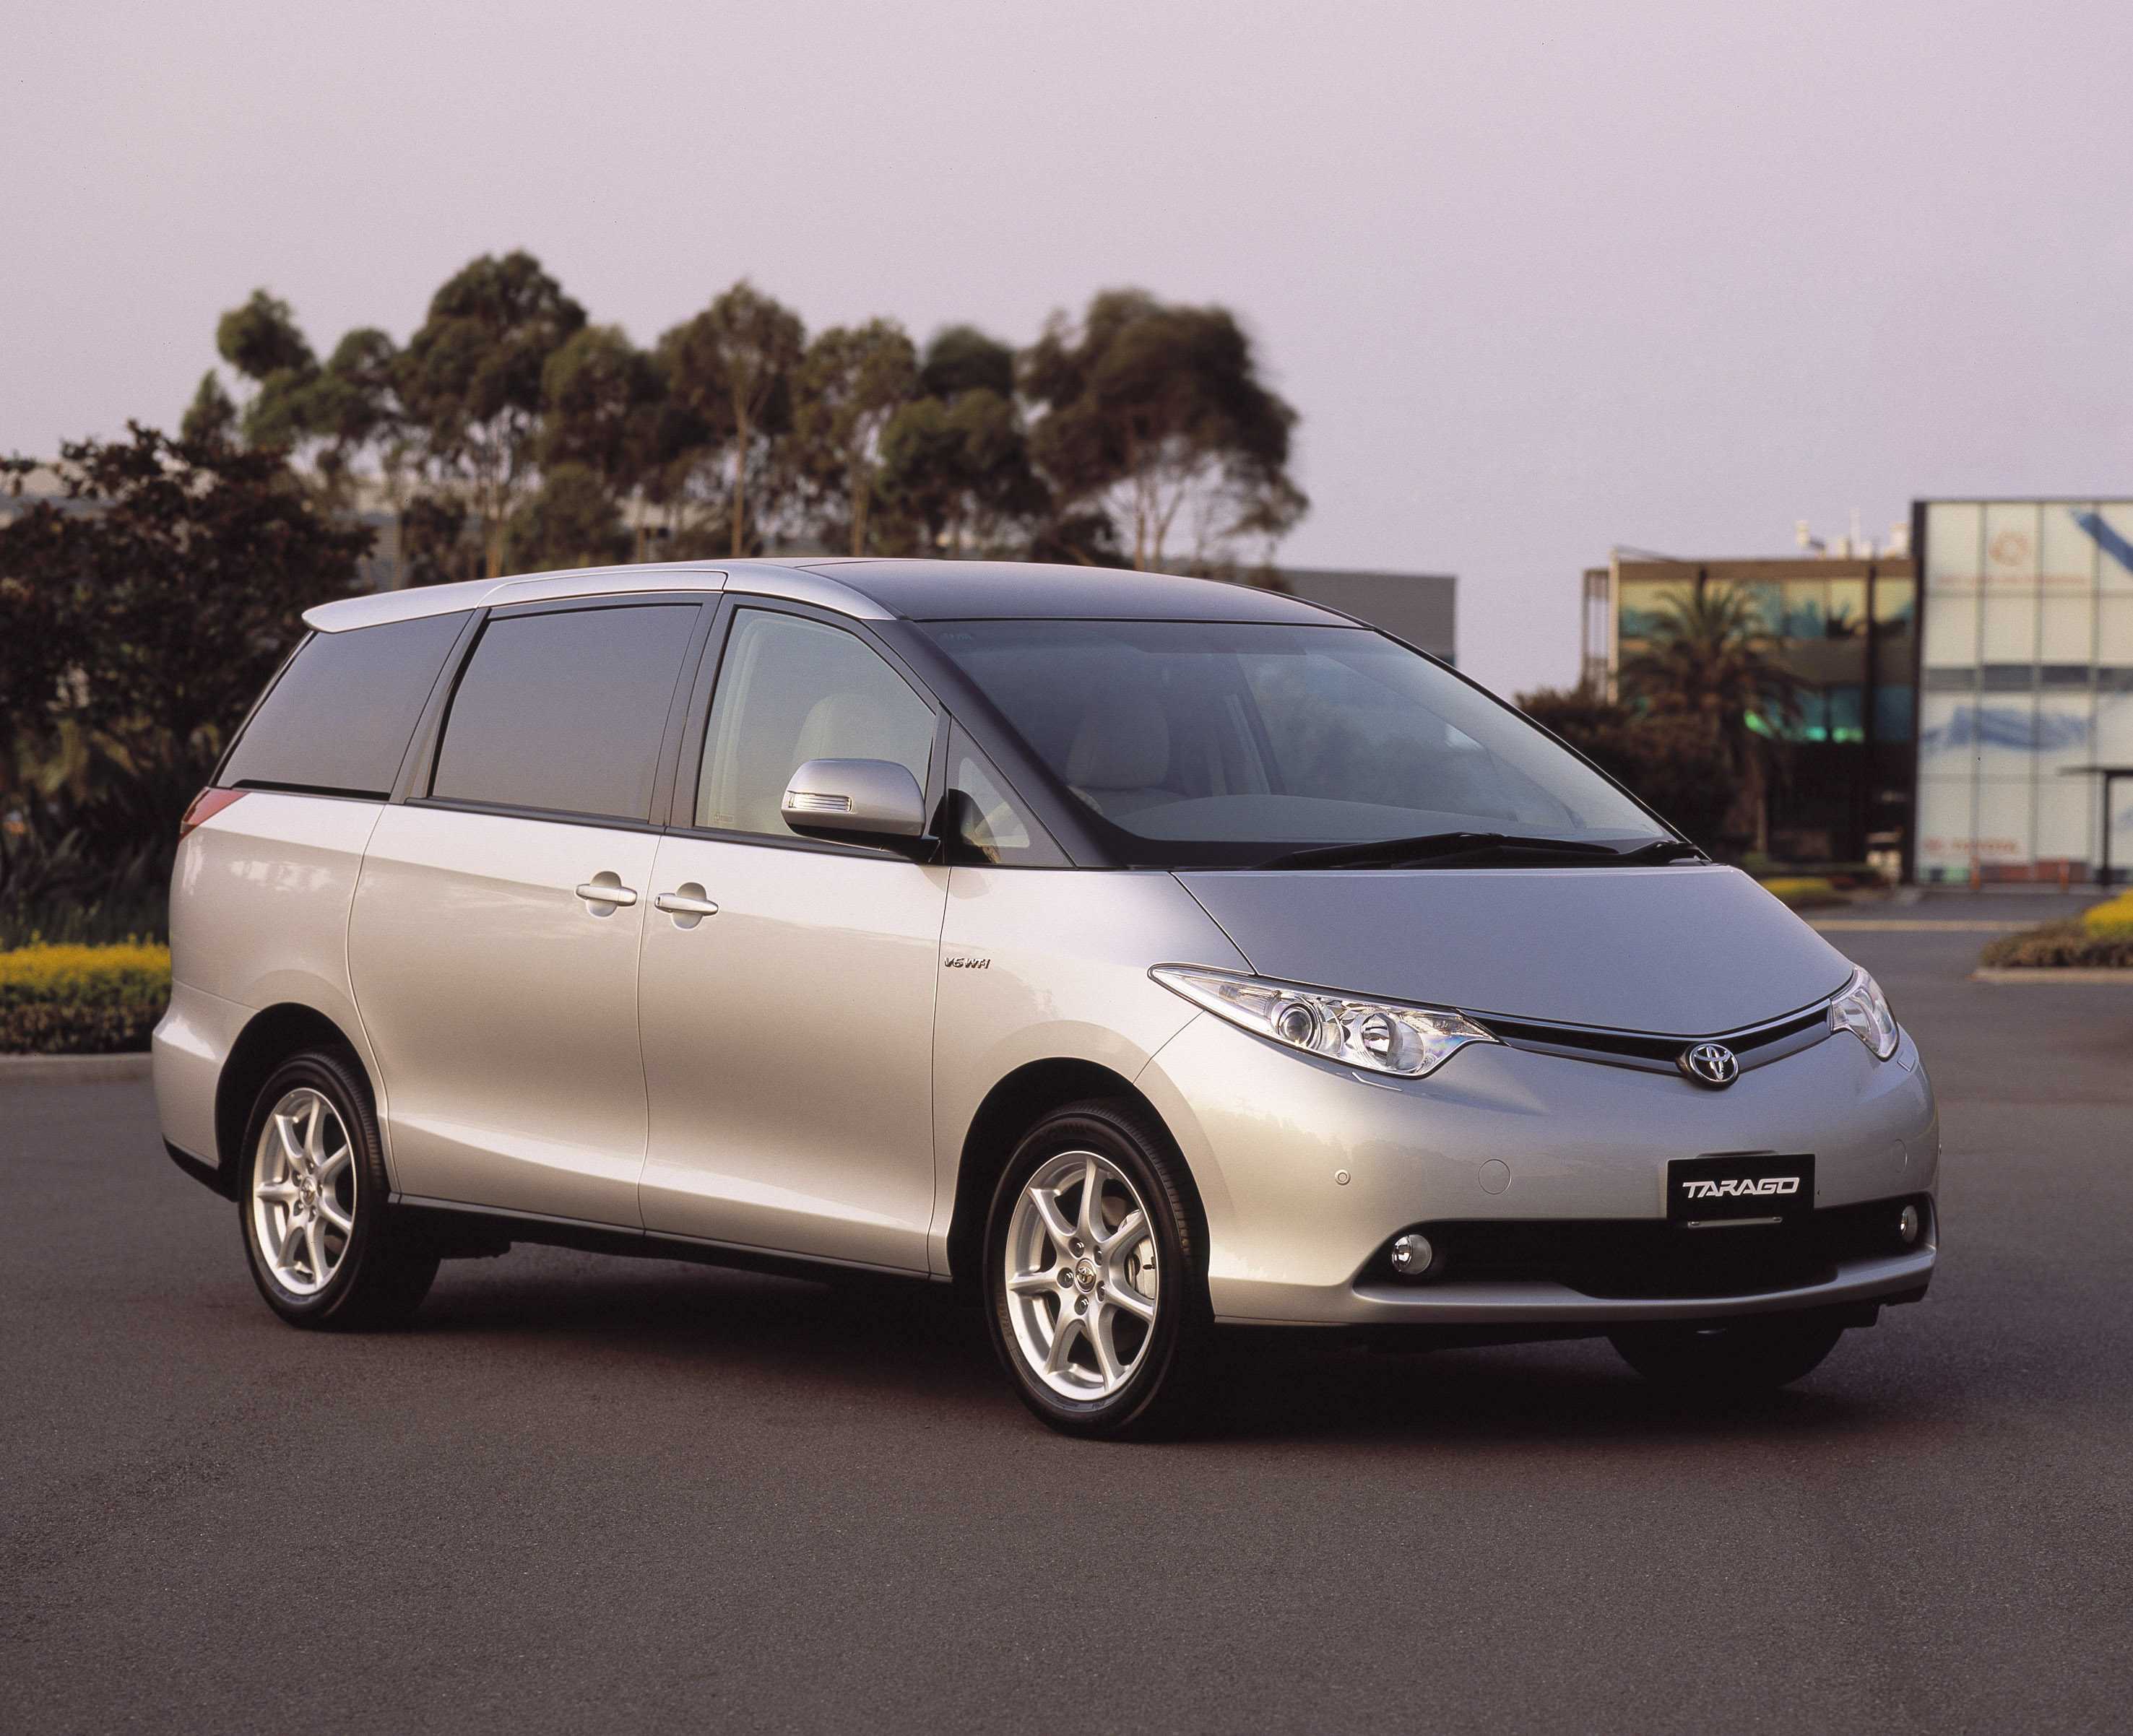 Toyota Previa generation XR50 3.5 V6 Automatic, 6-speed